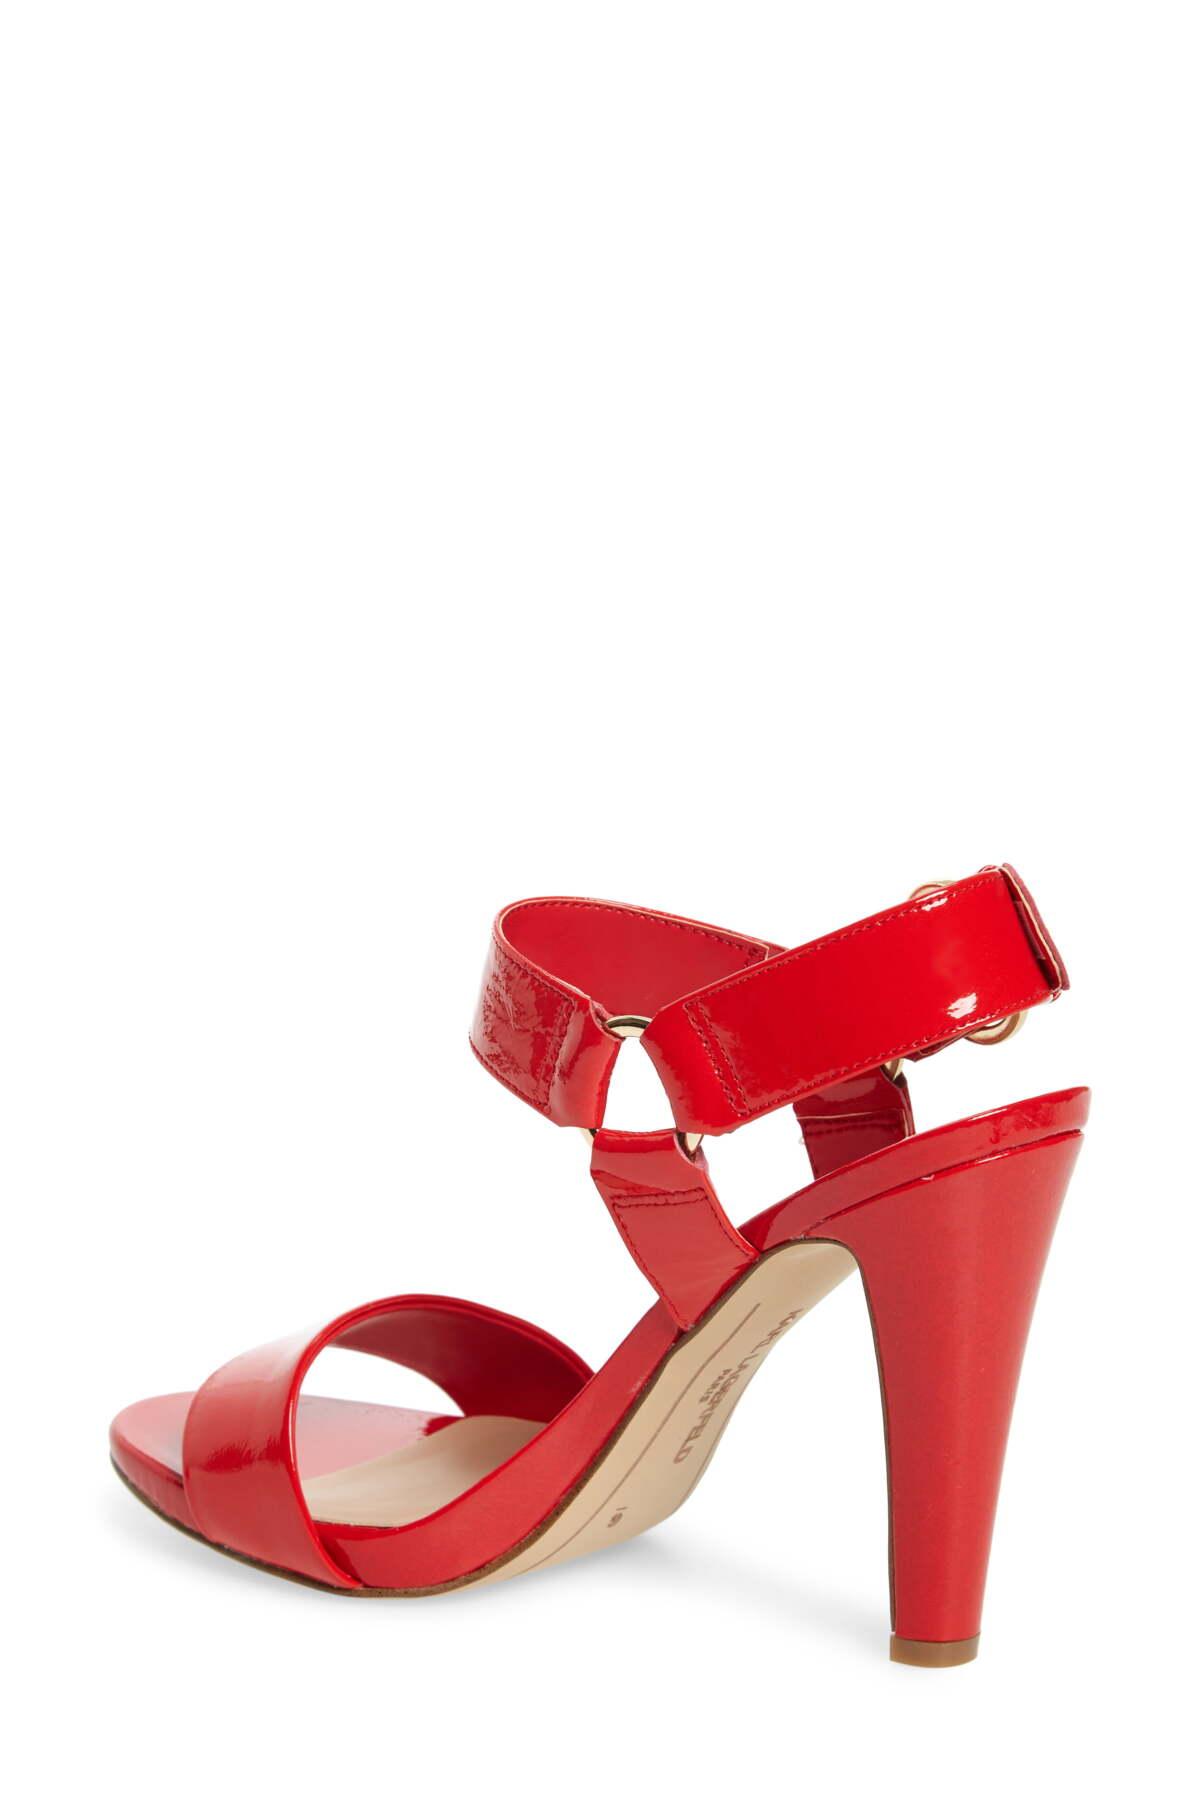 Karl Lagerfeld Leather Cieone Sandal in Red Patent (Red) - Lyst